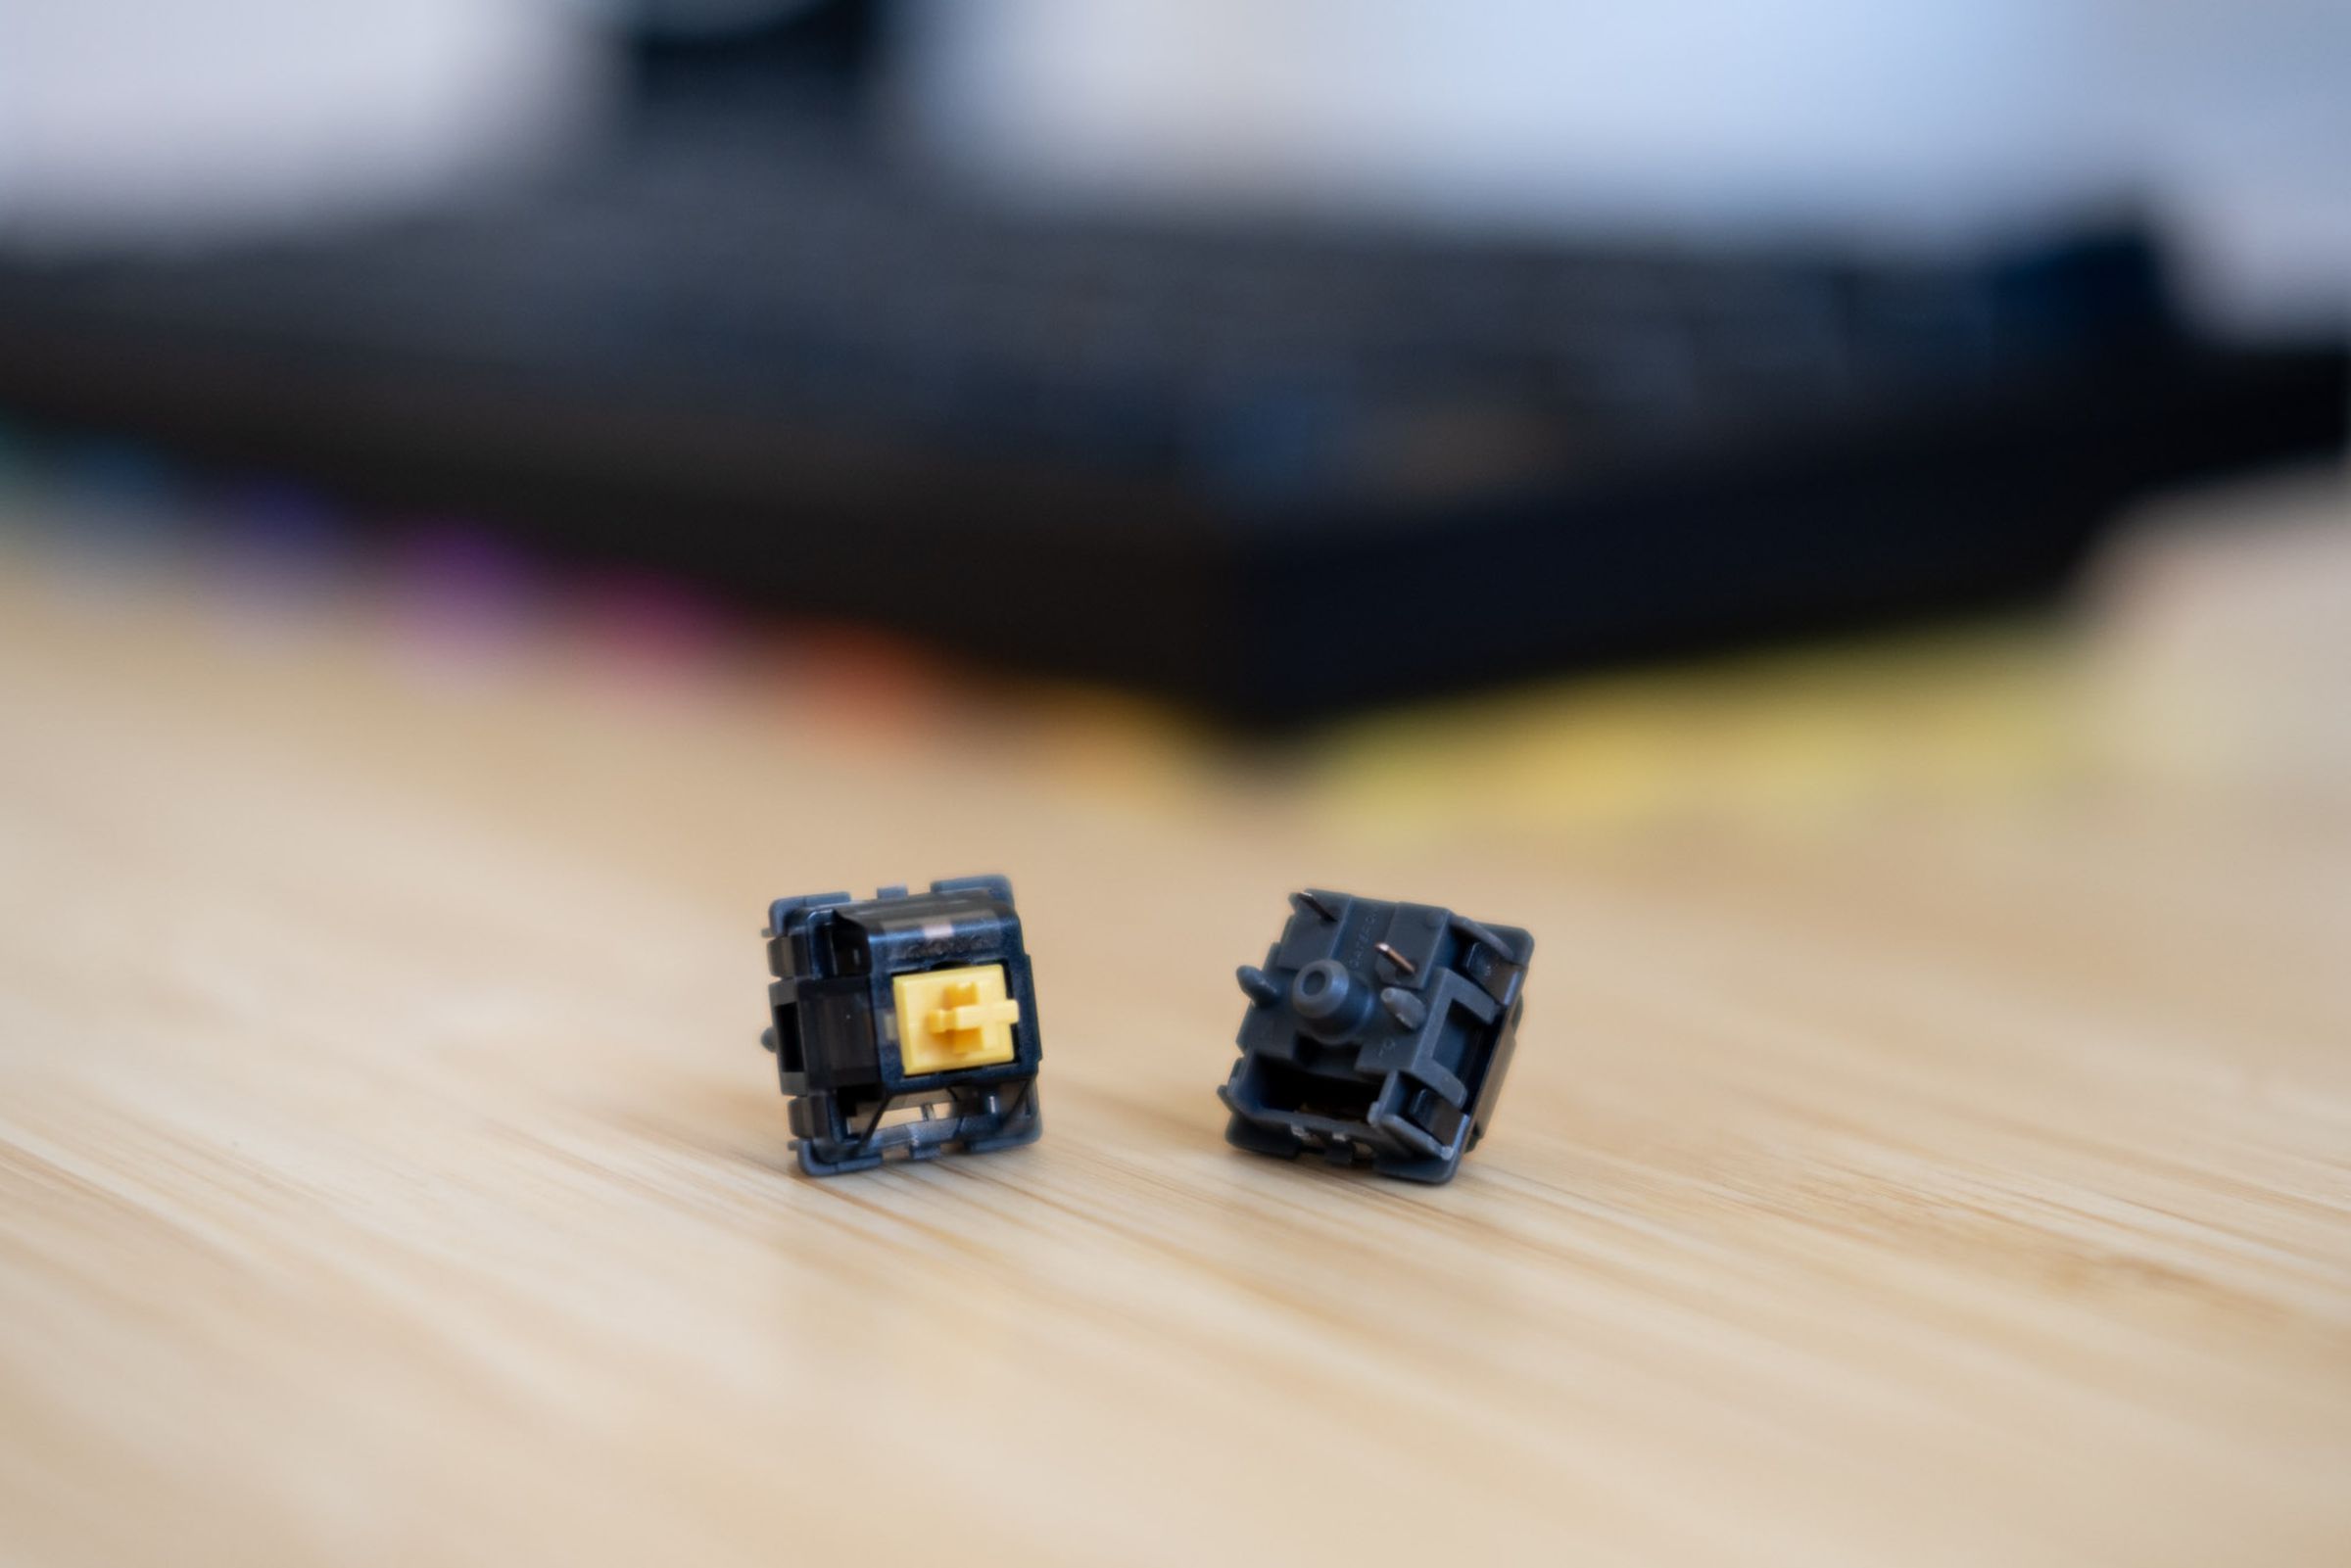 Two Holy Panda switches on a desk.